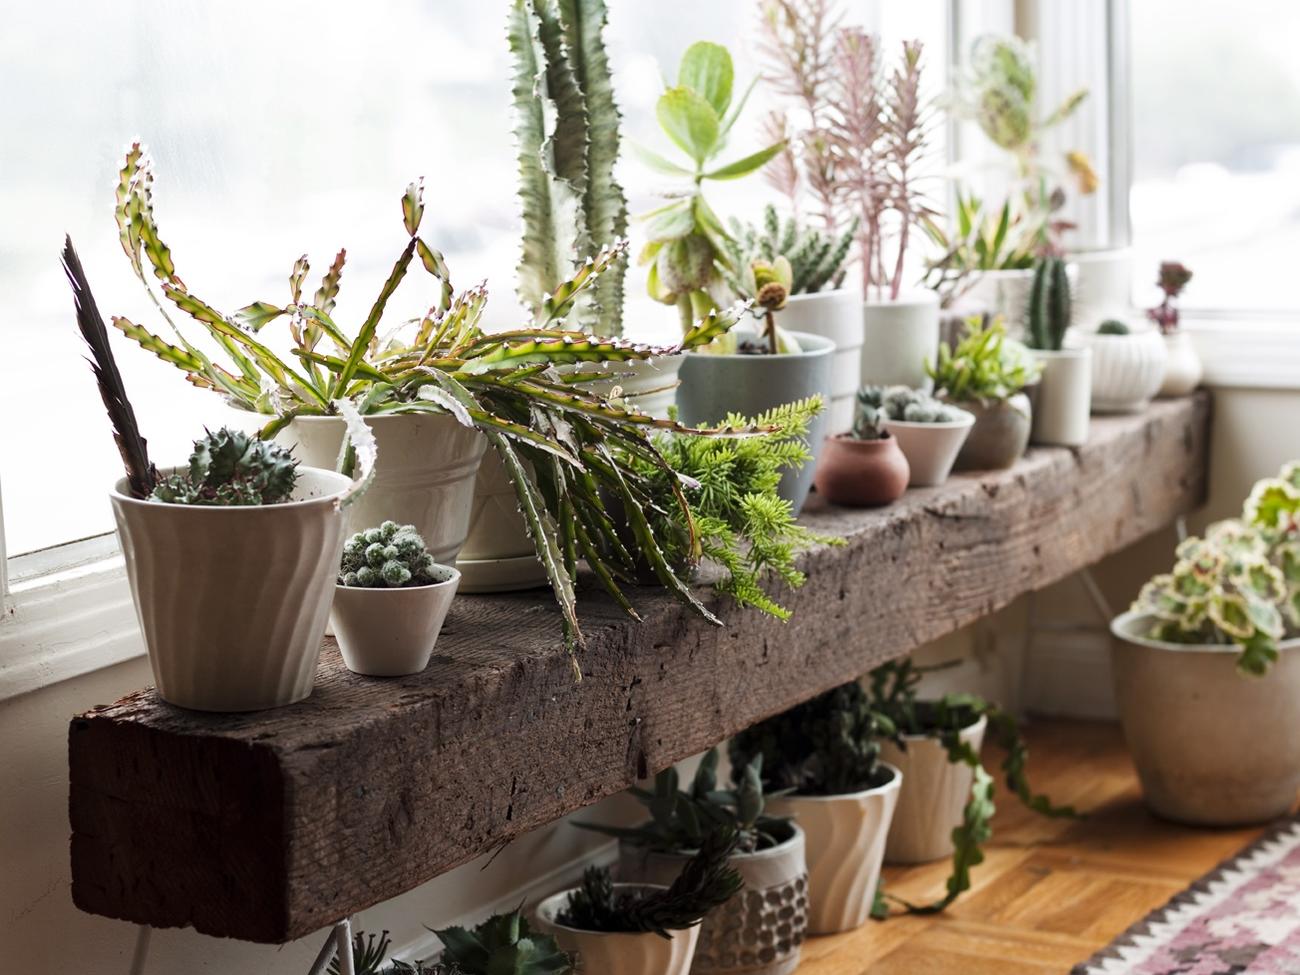 Everything you always wanted to know about houseplants*